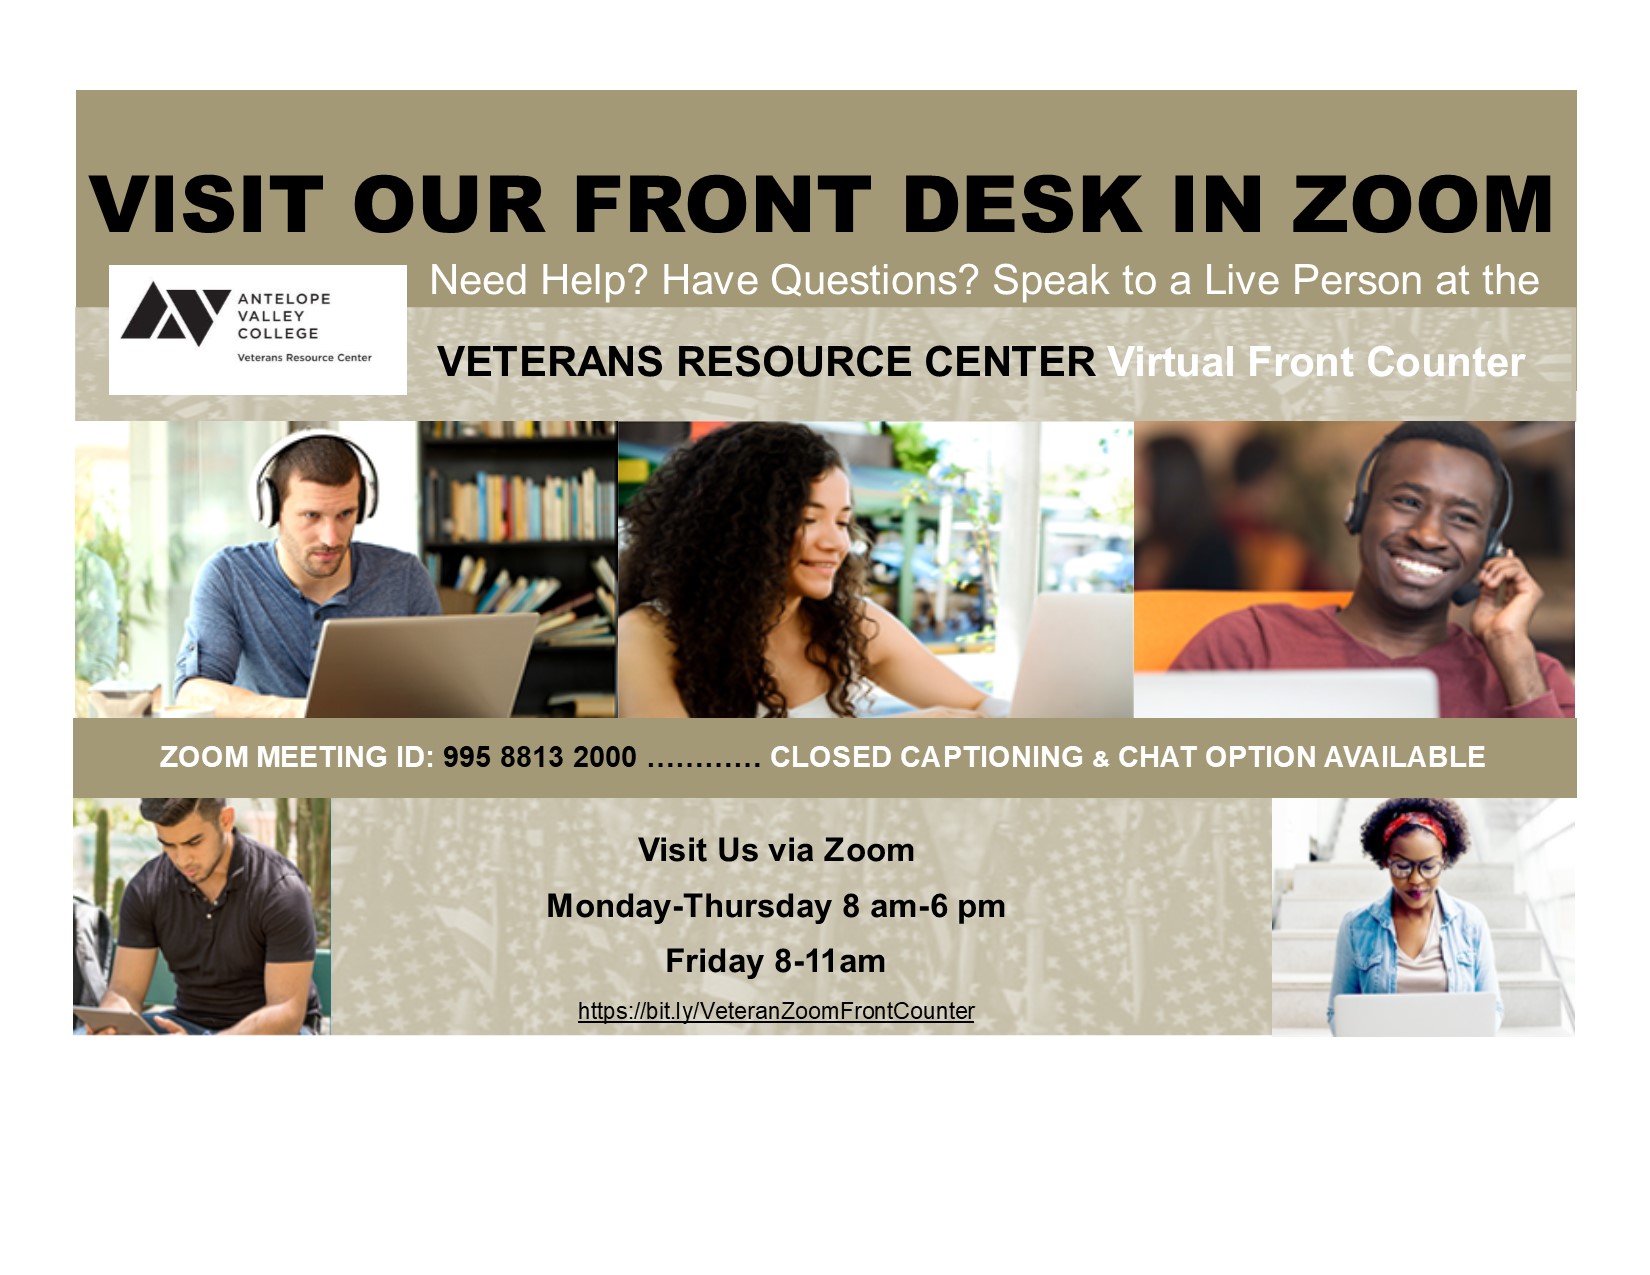 Veteran Front Counter Zoom Link Meeting ID: 995 8813 2000 Monday - Thursday 8:00am-6:00pm, Friday 8:00am-11:00am 